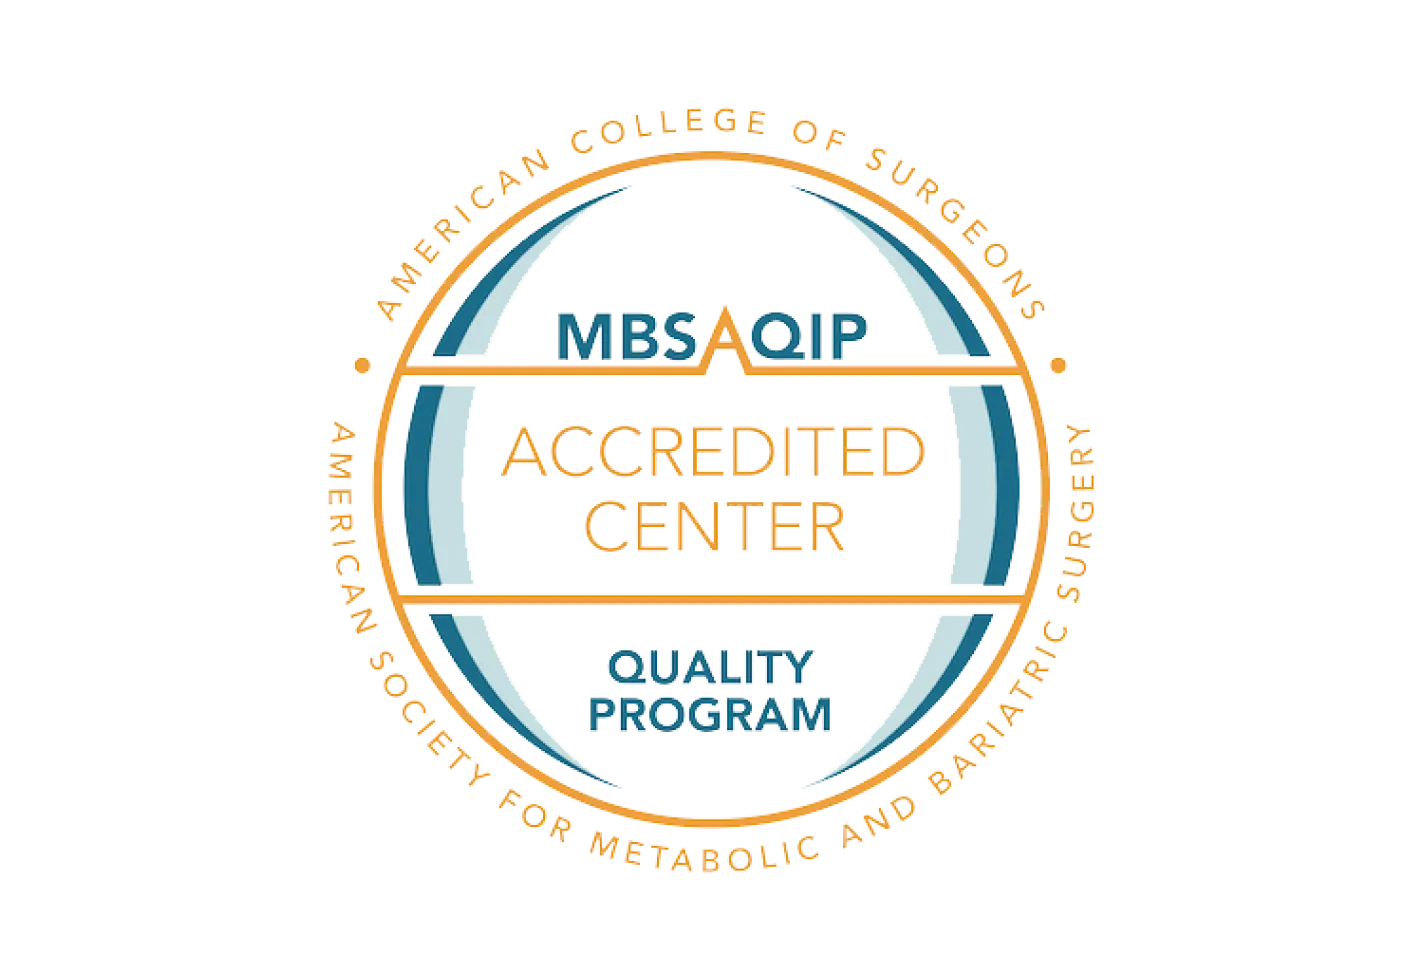 American College of Surgeons MBSAQIP Accredited Center Quality Program Badge | American Society for Metabolic and Bariatric Surgery